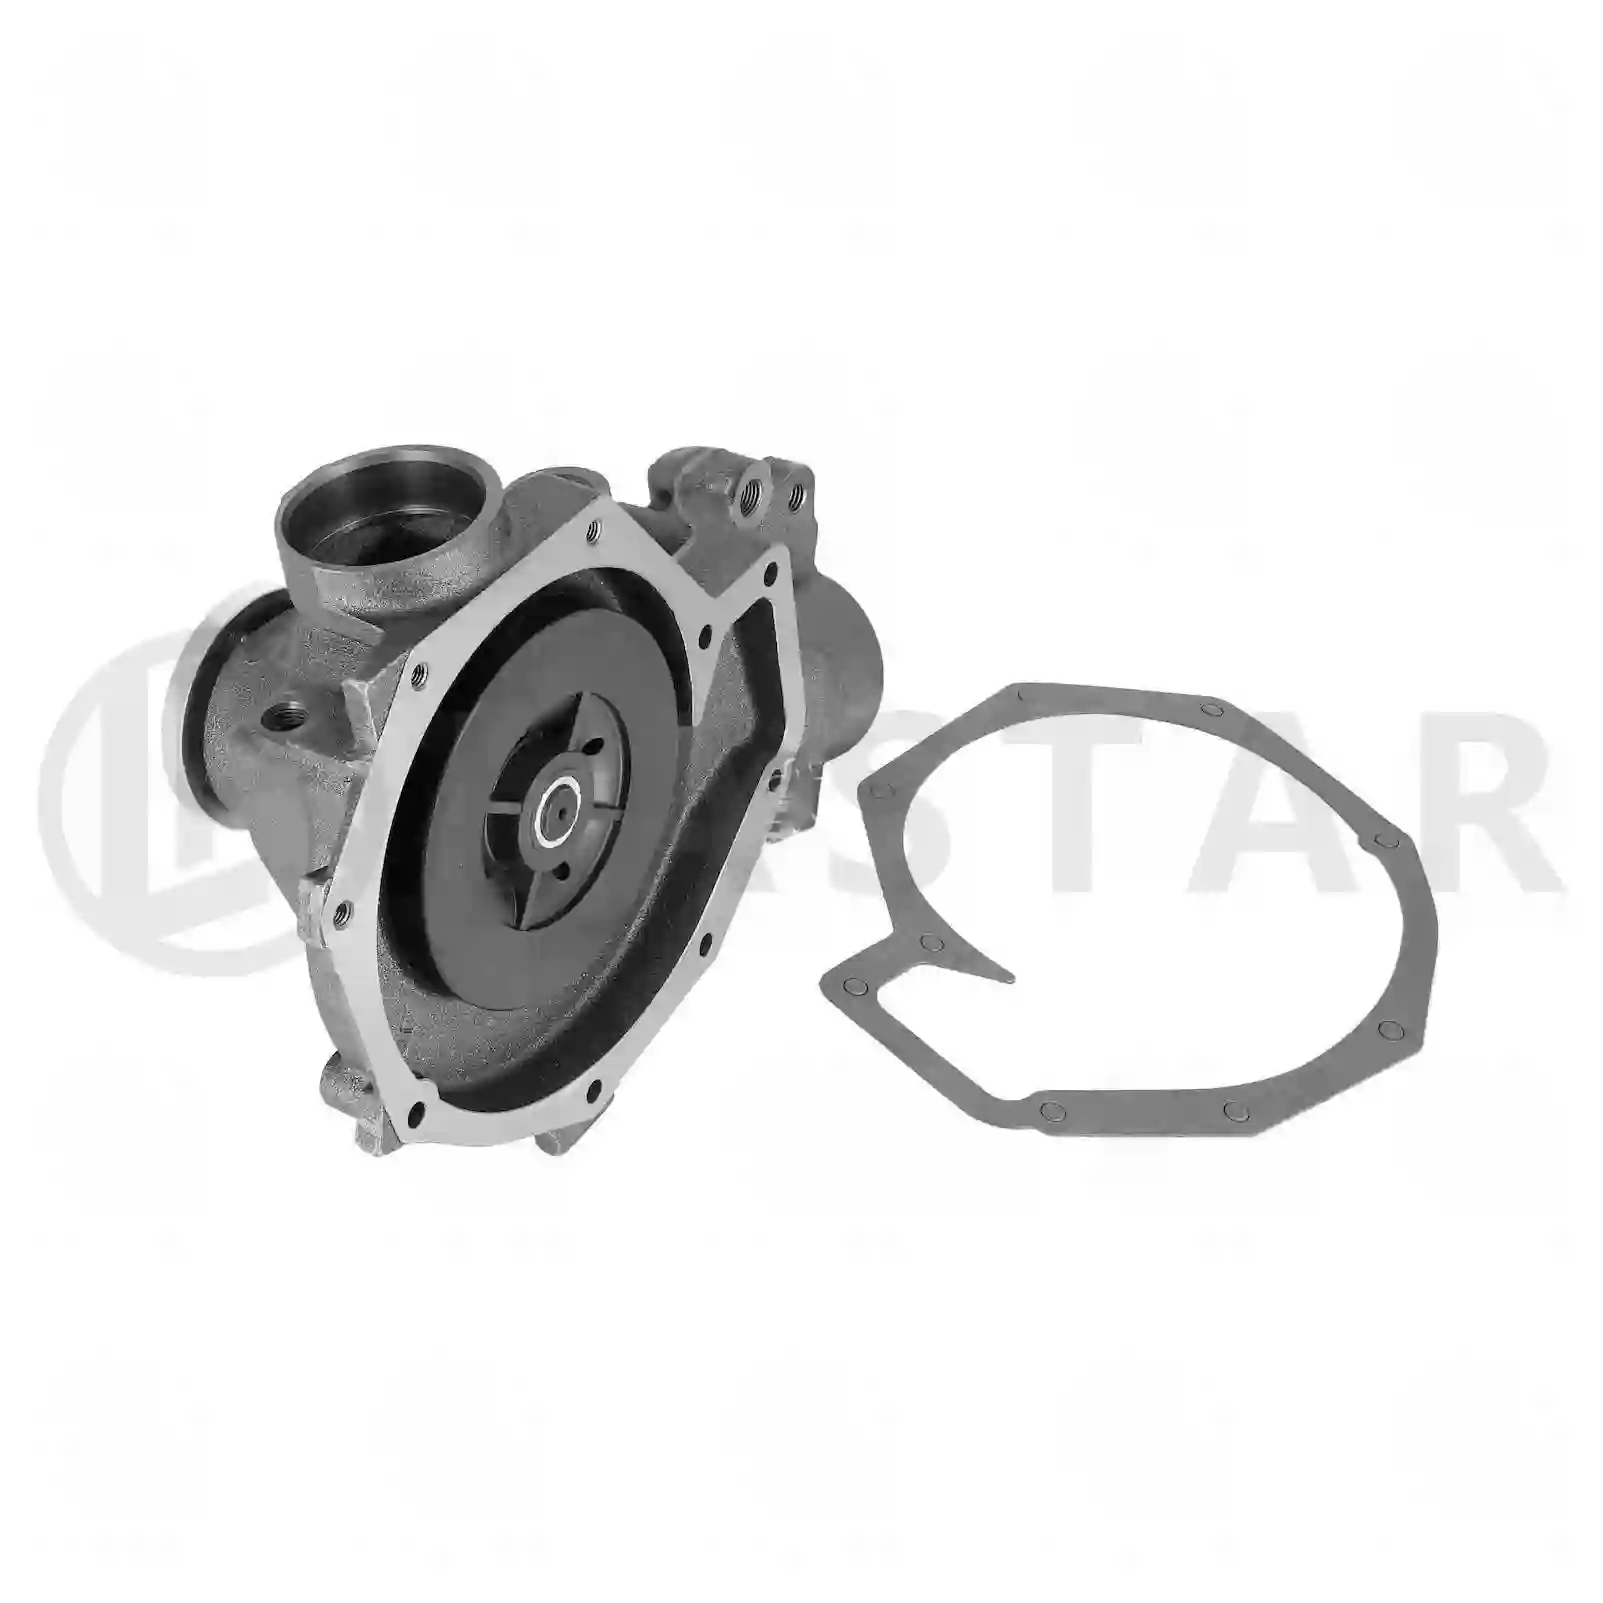 Water pump, complete with gaskets, 77708846, 1609853S, 1609853S1, ZG00754-0008 ||  77708846 Lastar Spare Part | Truck Spare Parts, Auotomotive Spare Parts Water pump, complete with gaskets, 77708846, 1609853S, 1609853S1, ZG00754-0008 ||  77708846 Lastar Spare Part | Truck Spare Parts, Auotomotive Spare Parts